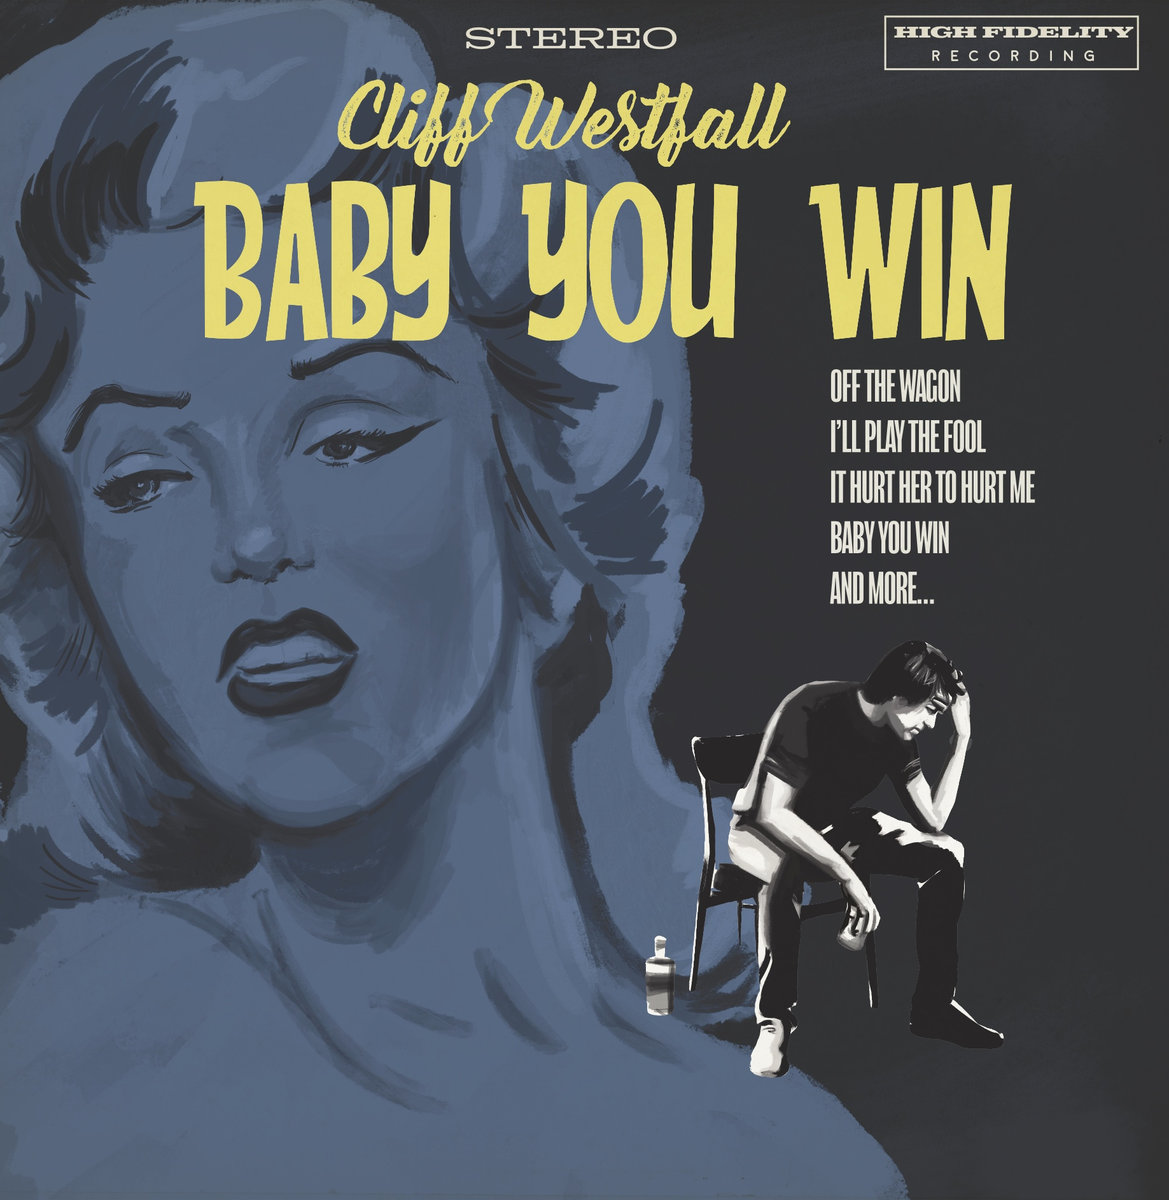 Album Review – Cliff Westfall – Baby You Win